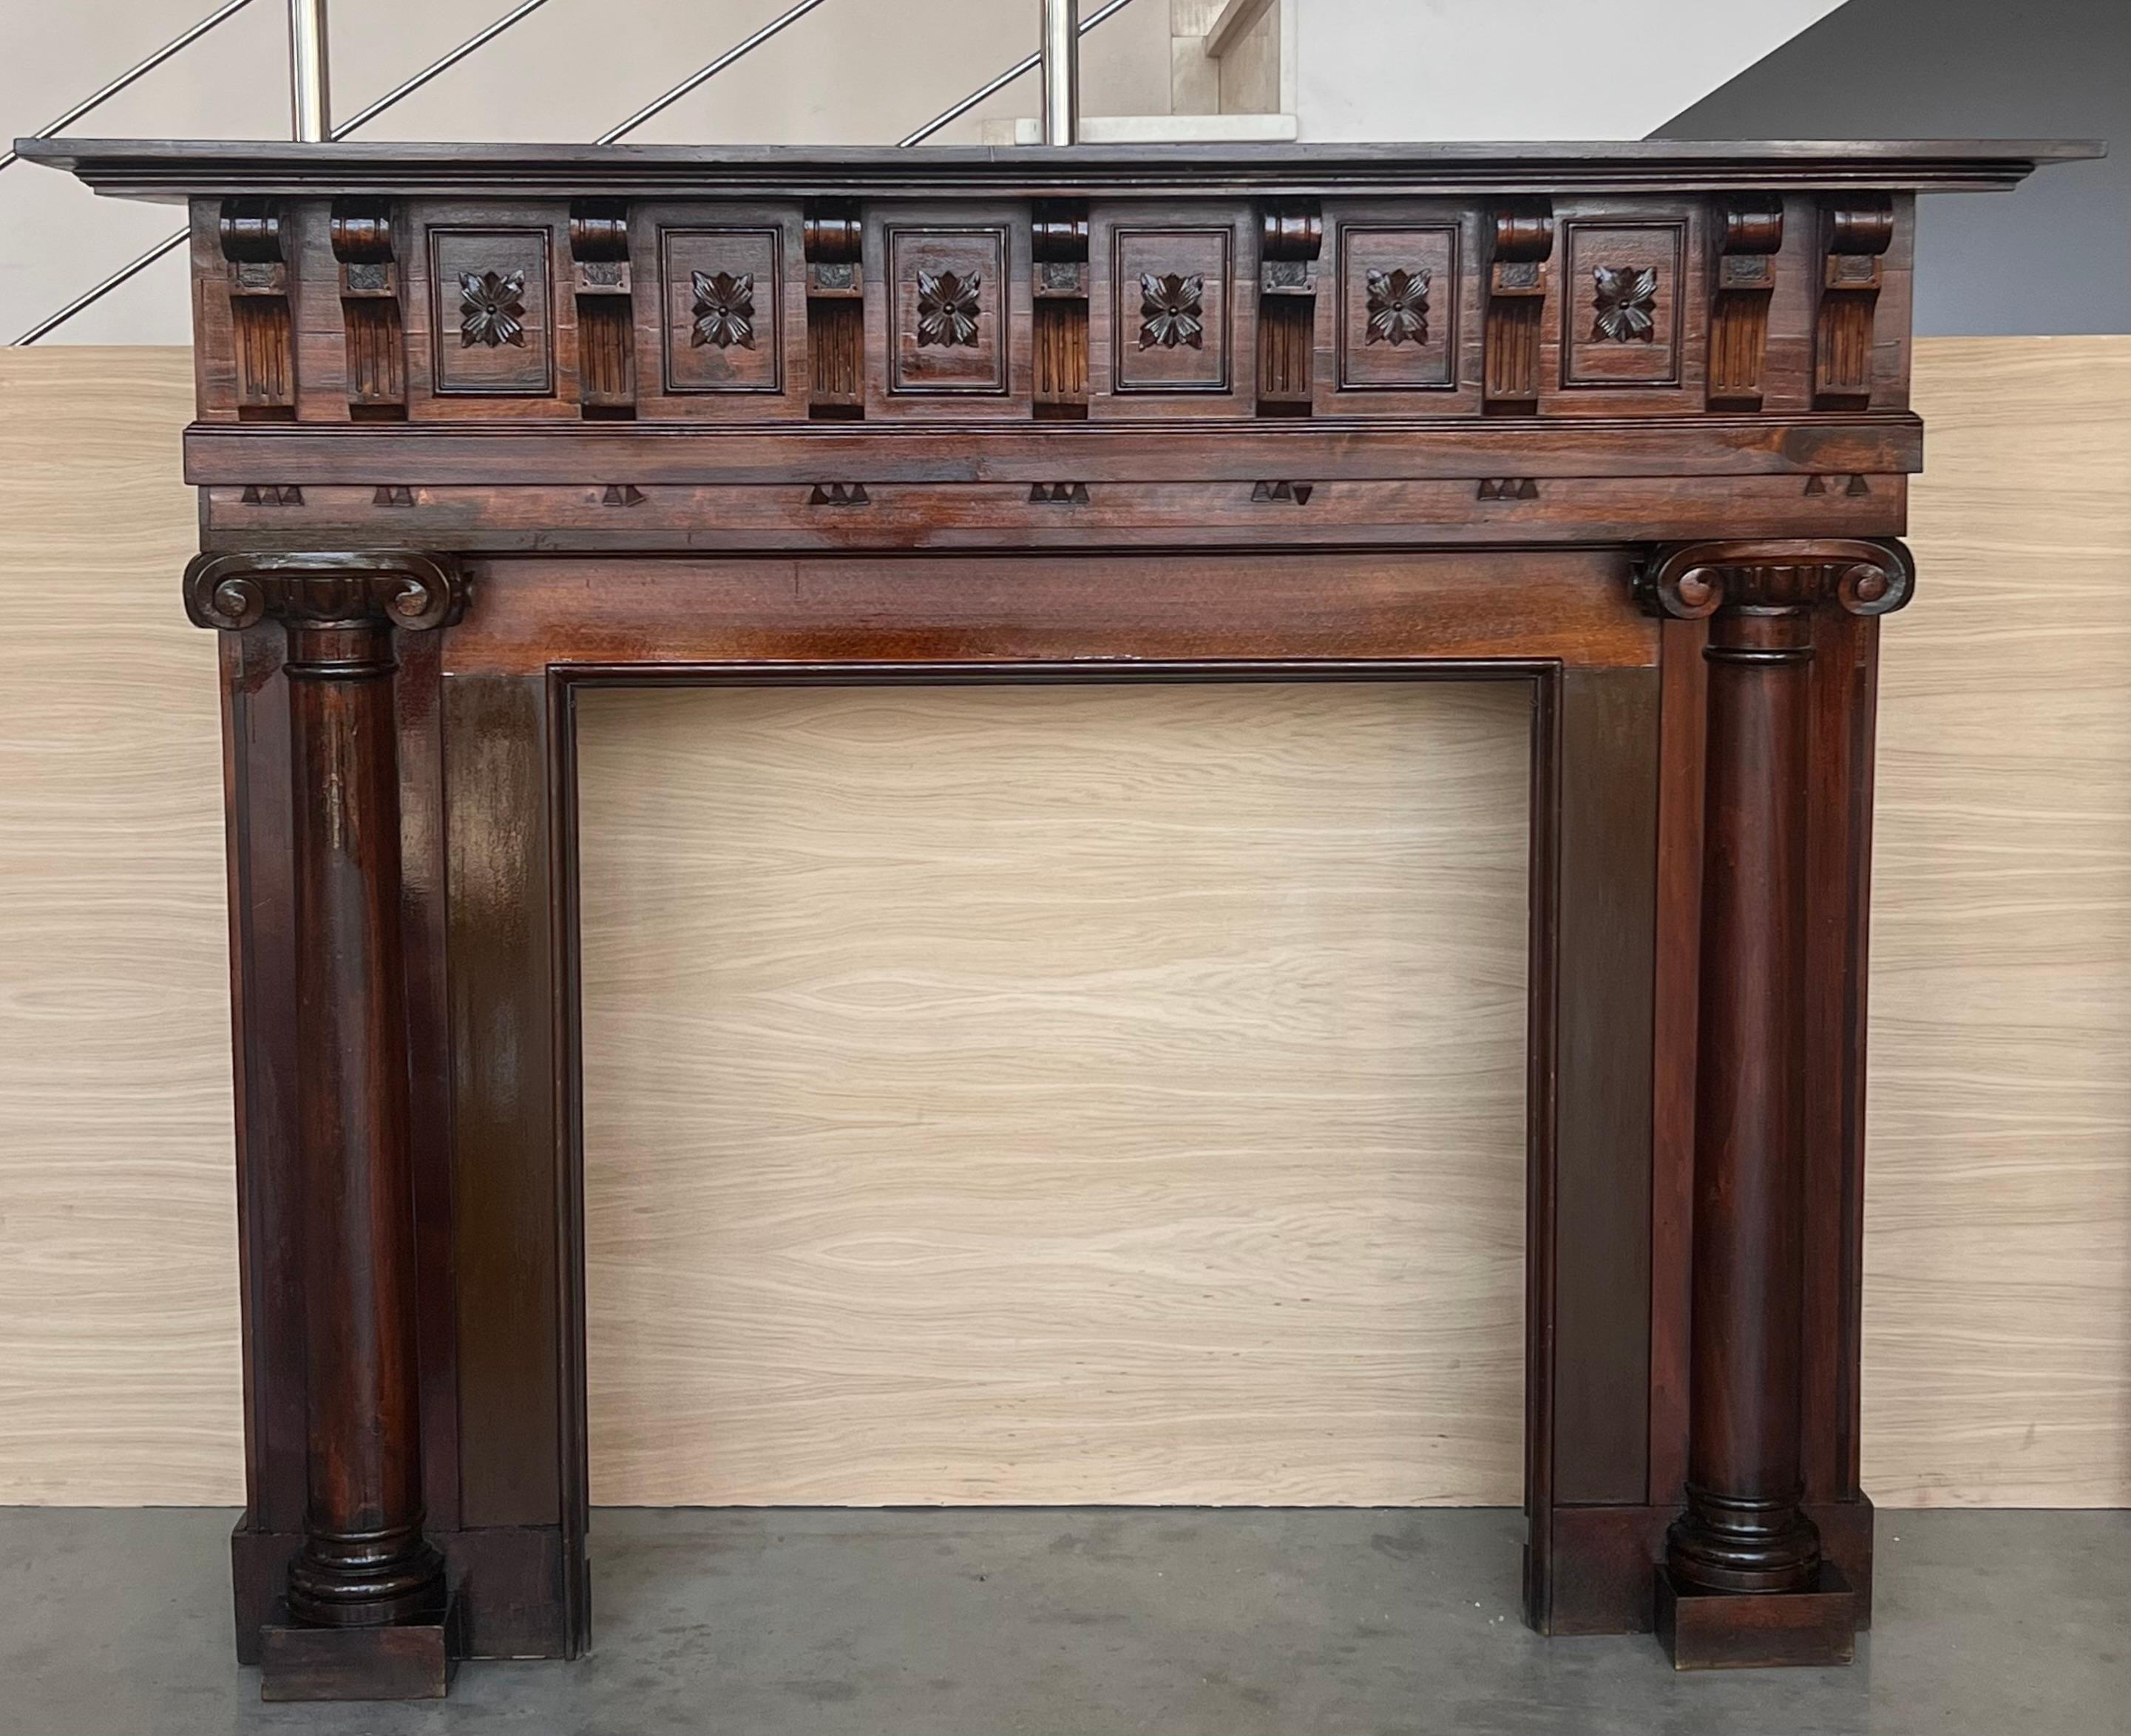 A handsome antique Edwardian style oak fire mantel dating from the early 20th century. This fire surround is substantially constructed in solid oak with a beautiful colour that will make a spectacular focal point of a chimneybreast. Features include